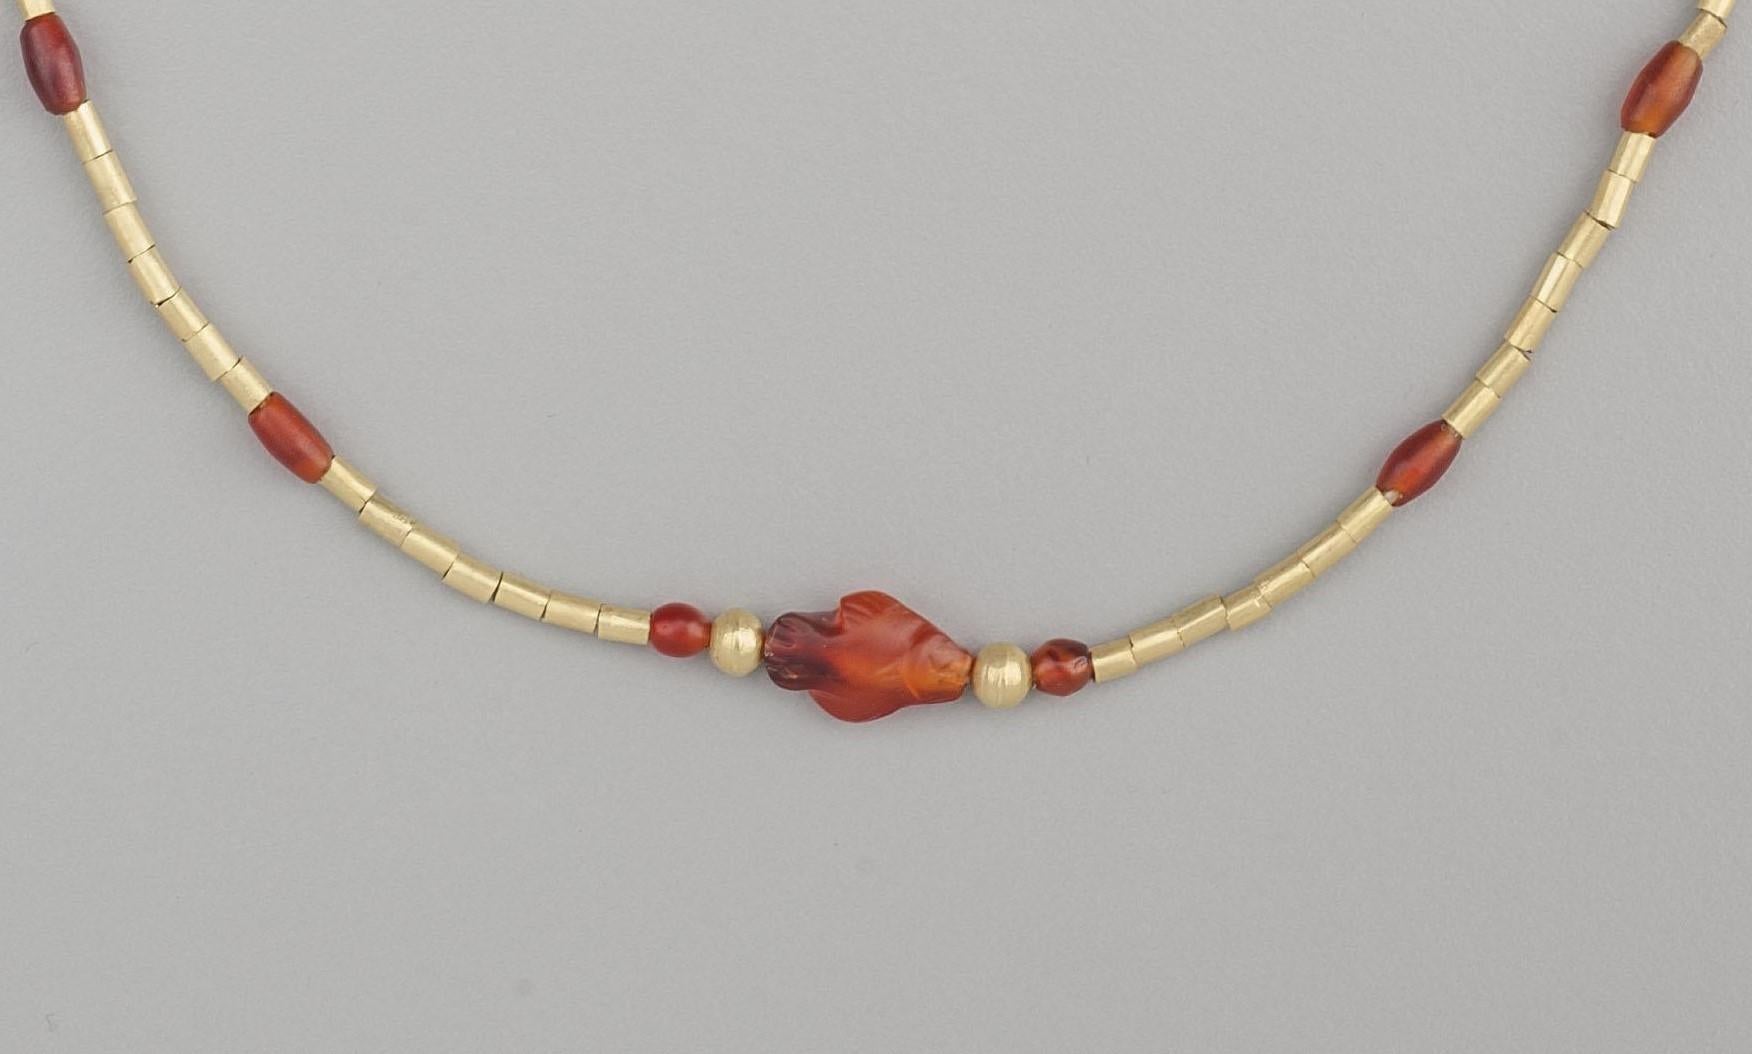 Ninety-six 20k gold tube beads, fourteen carnelian barrel beads, and a carved carnelian fish amulet faced on each side with a pair of spherical 20k gold beads. Gold beading tips and a hook and eye clasp complete the strand. The fish bead is 1.45 cm